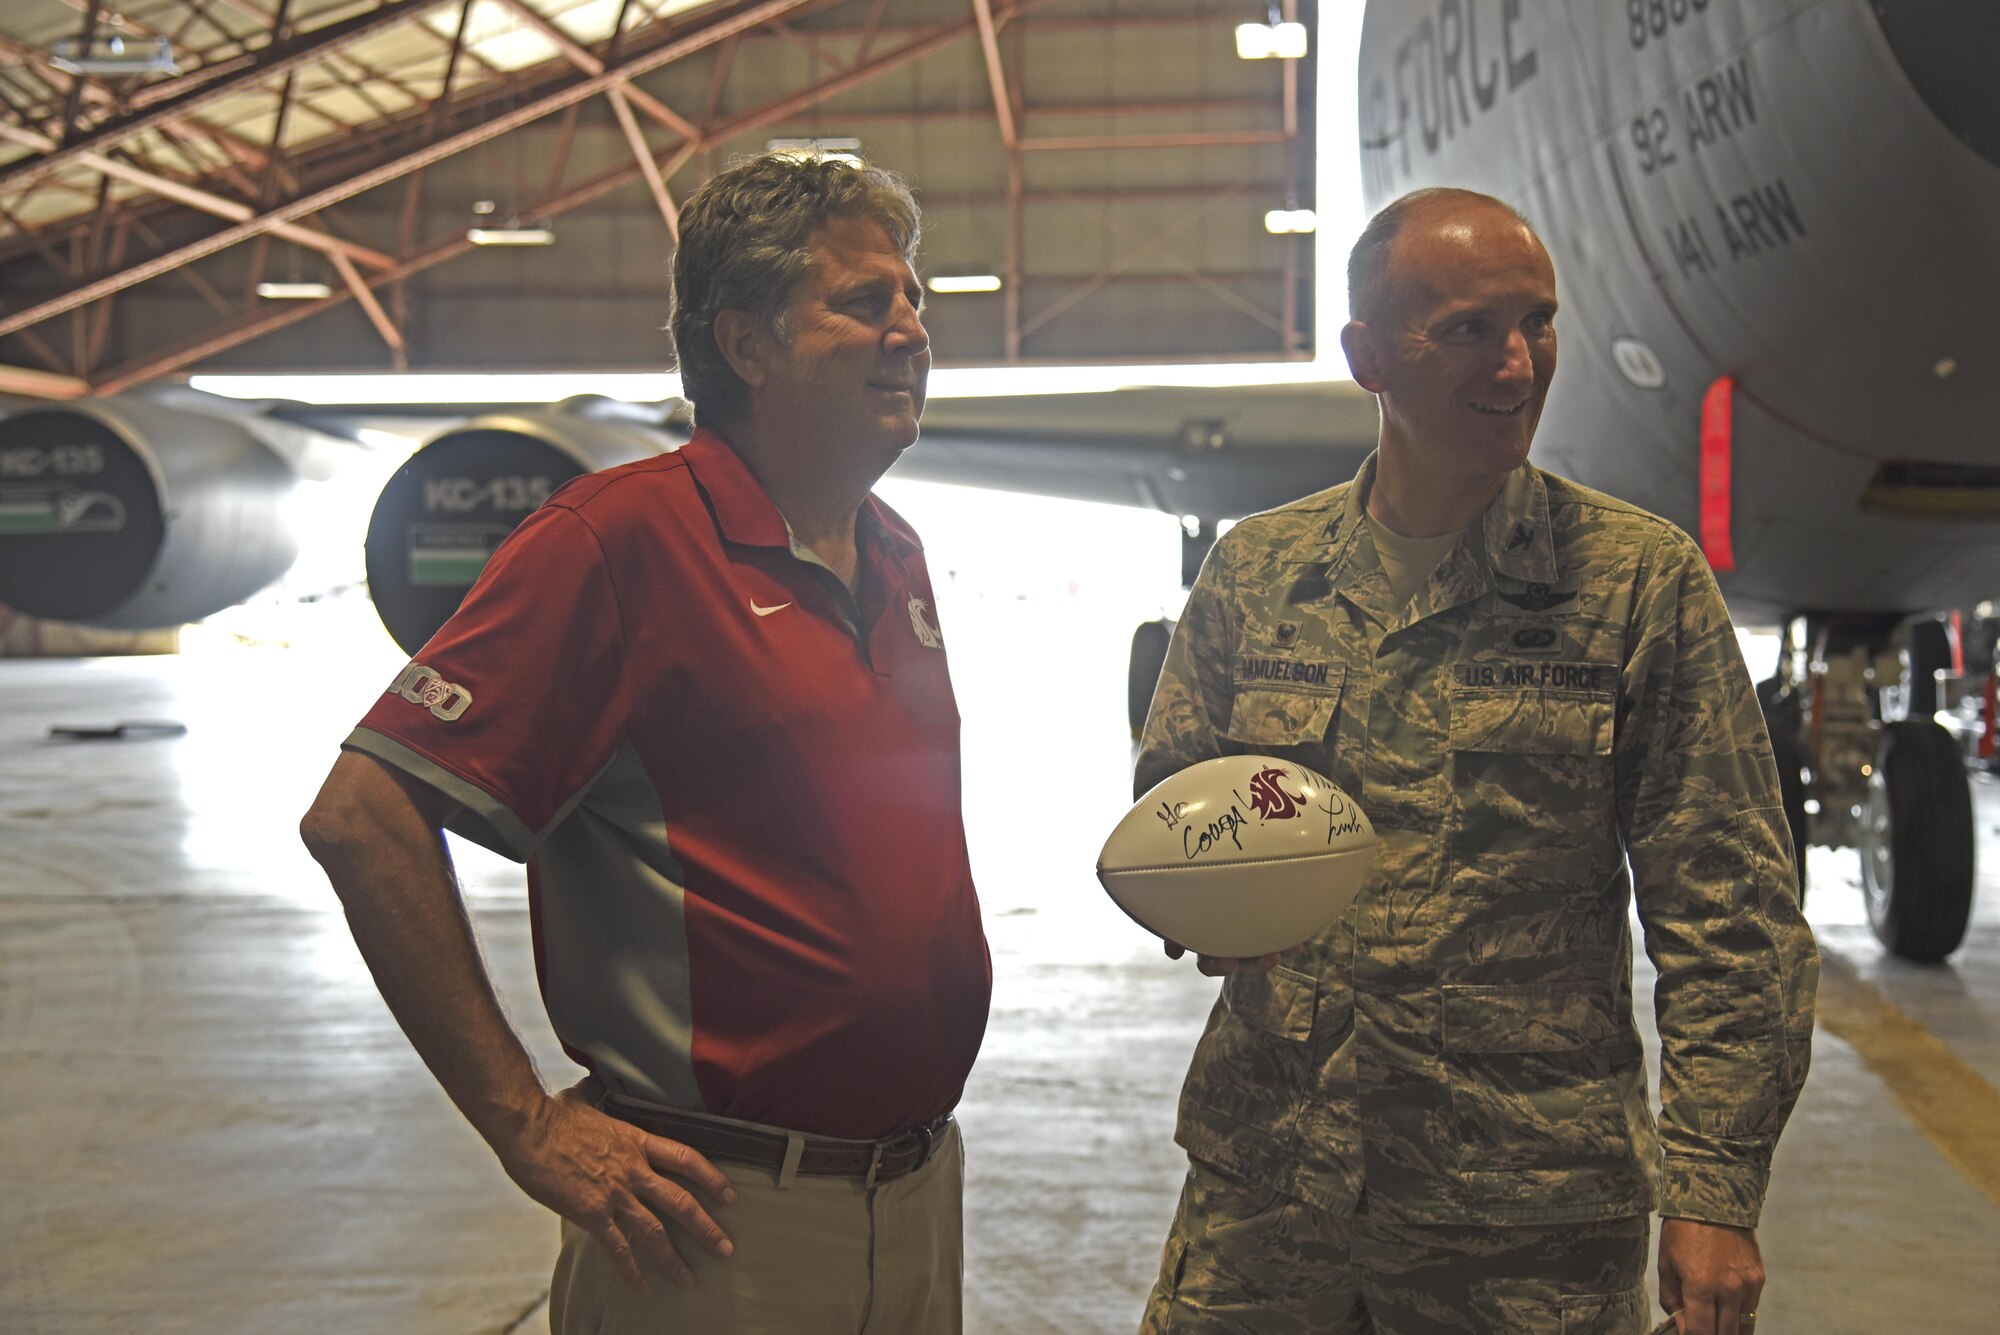 Col. Ryan Samuelson, 92nd Air Refueling Wing commander provides Mike Leach, Washington State University head football coach, a mission briefing during his visit Aug. 15, 2017, at Fairchild Air Force Base, Washington. Leach’s father, Frank, served in the Air Force during the Korean War. He was stationed at Deep Creek, one of four storage facilities near present-day Fairchild used for Nike missiles during the 1950s and 1960s. (U.S. Air Force photo/Senior Airman Mackenzie Richardson)